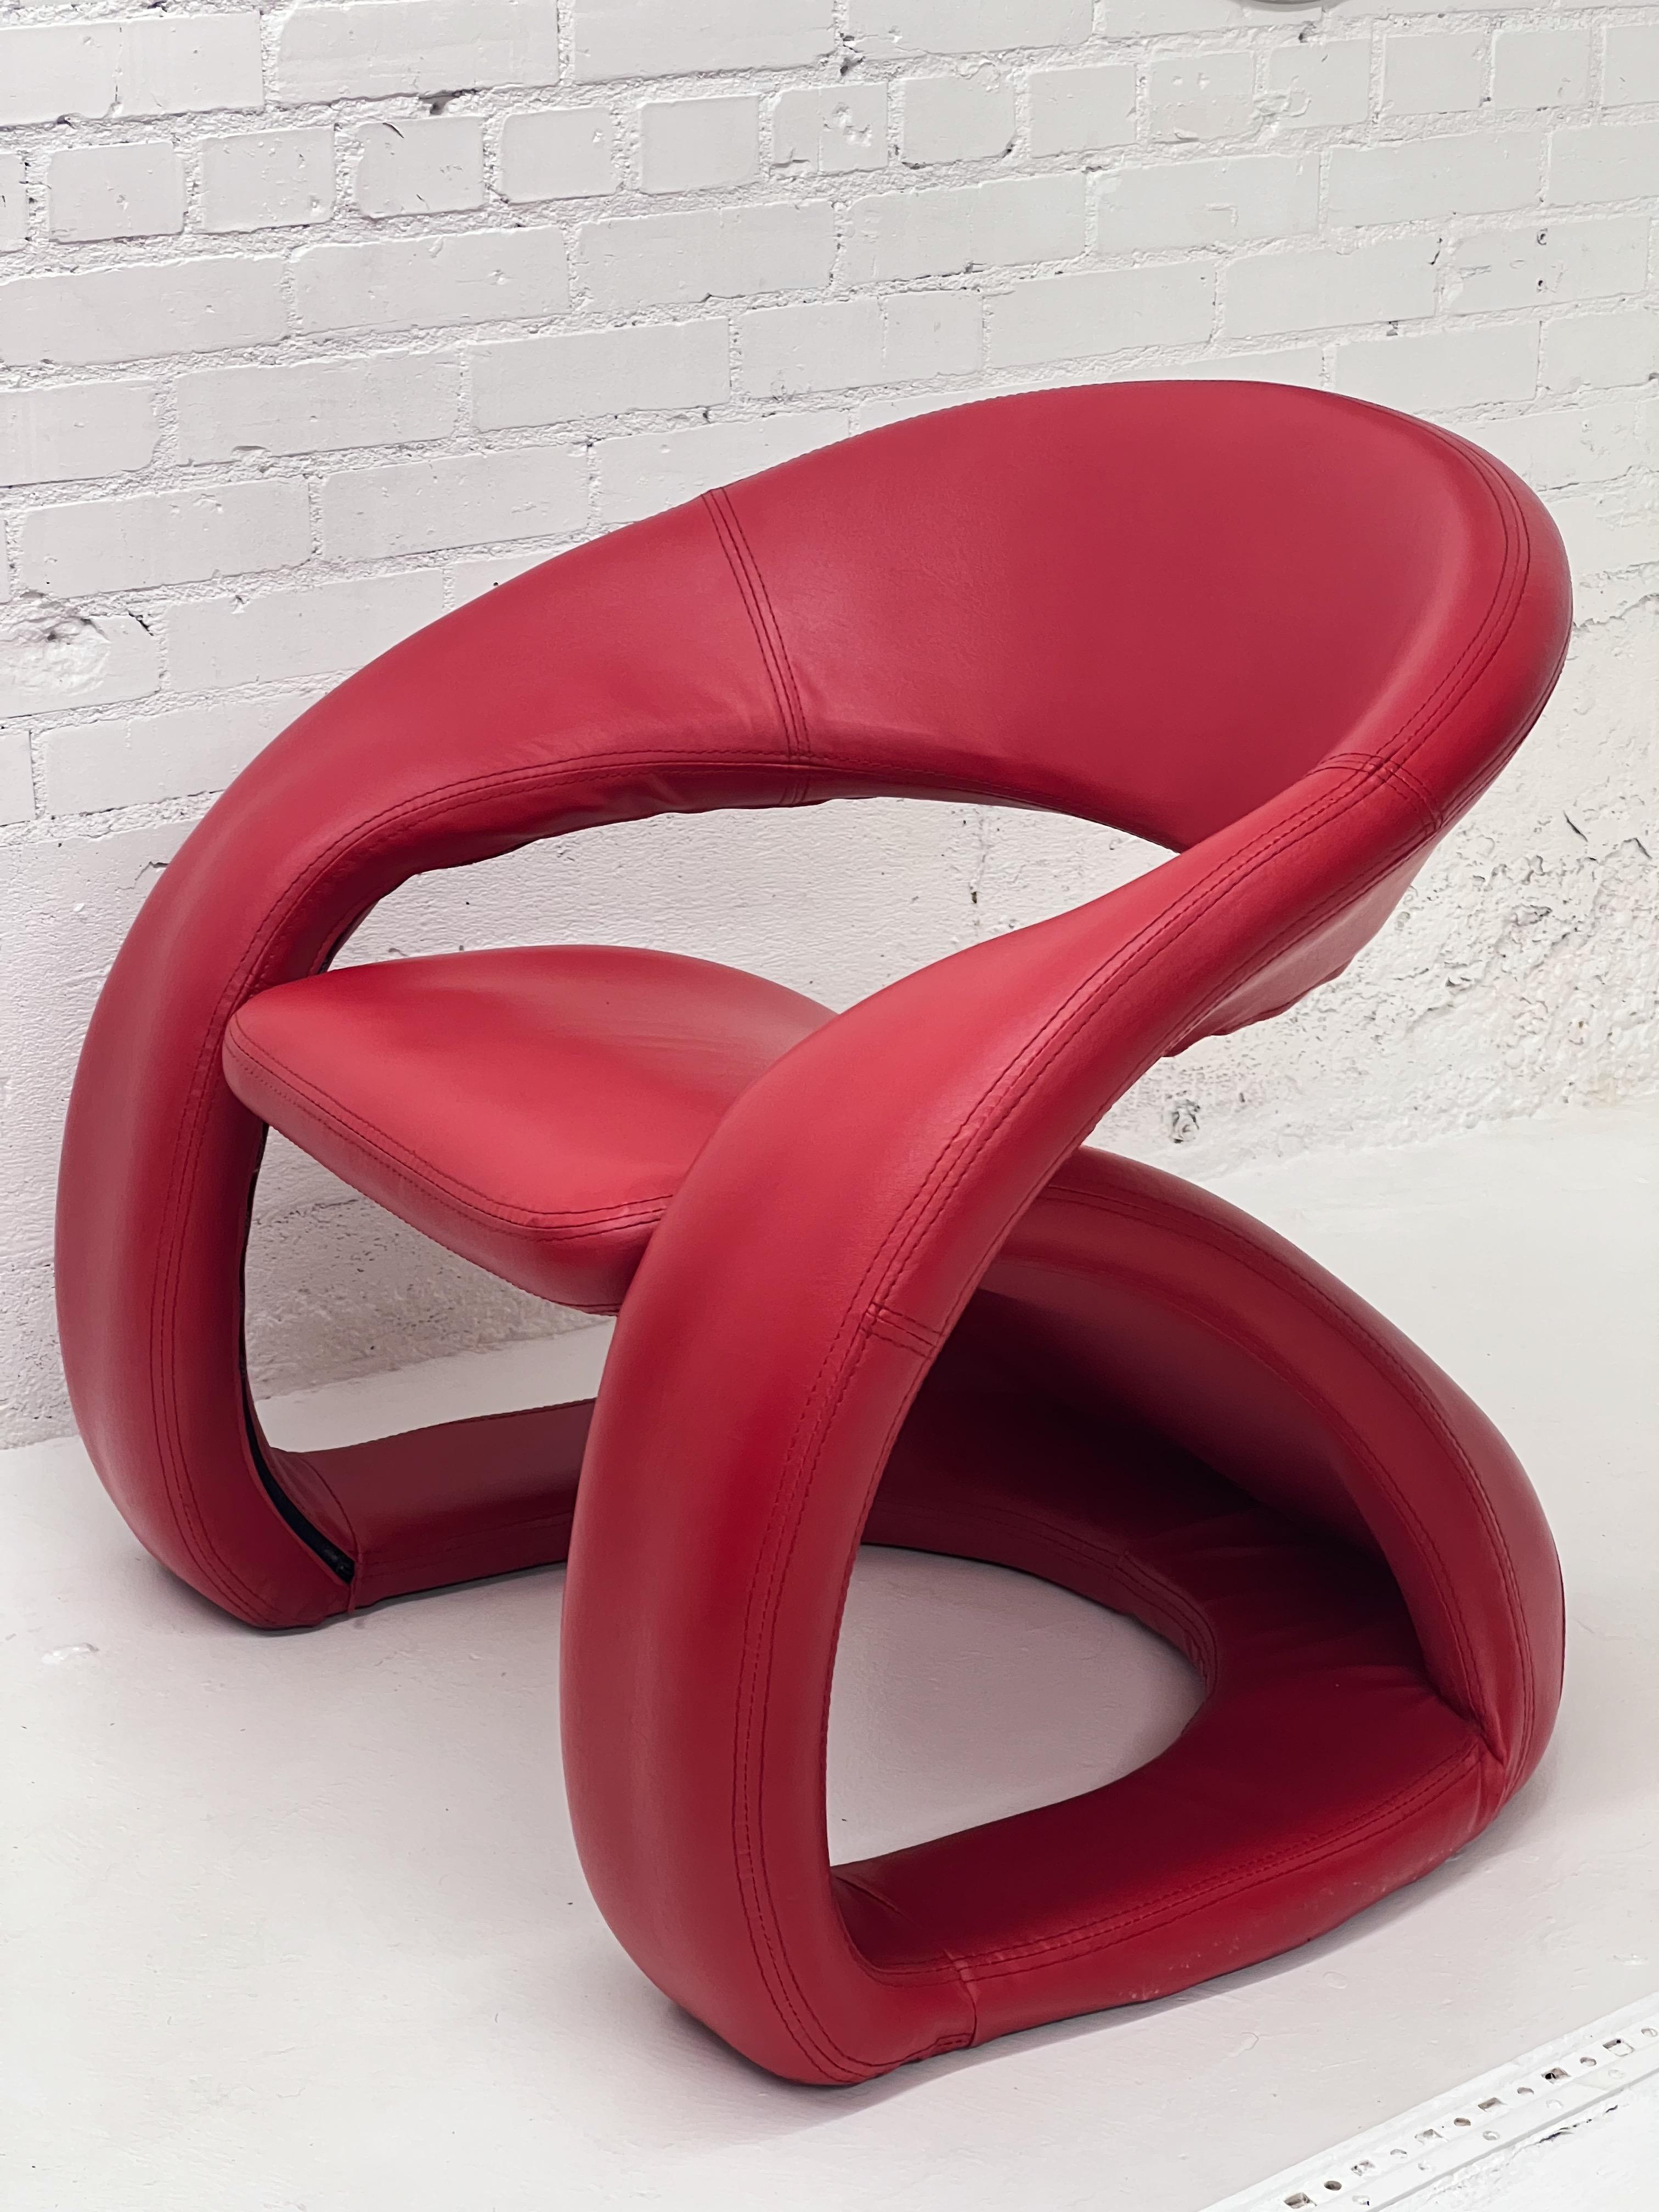 Canadian 1980's Red Pop Art Tongue Chair Attributed to Jaymar